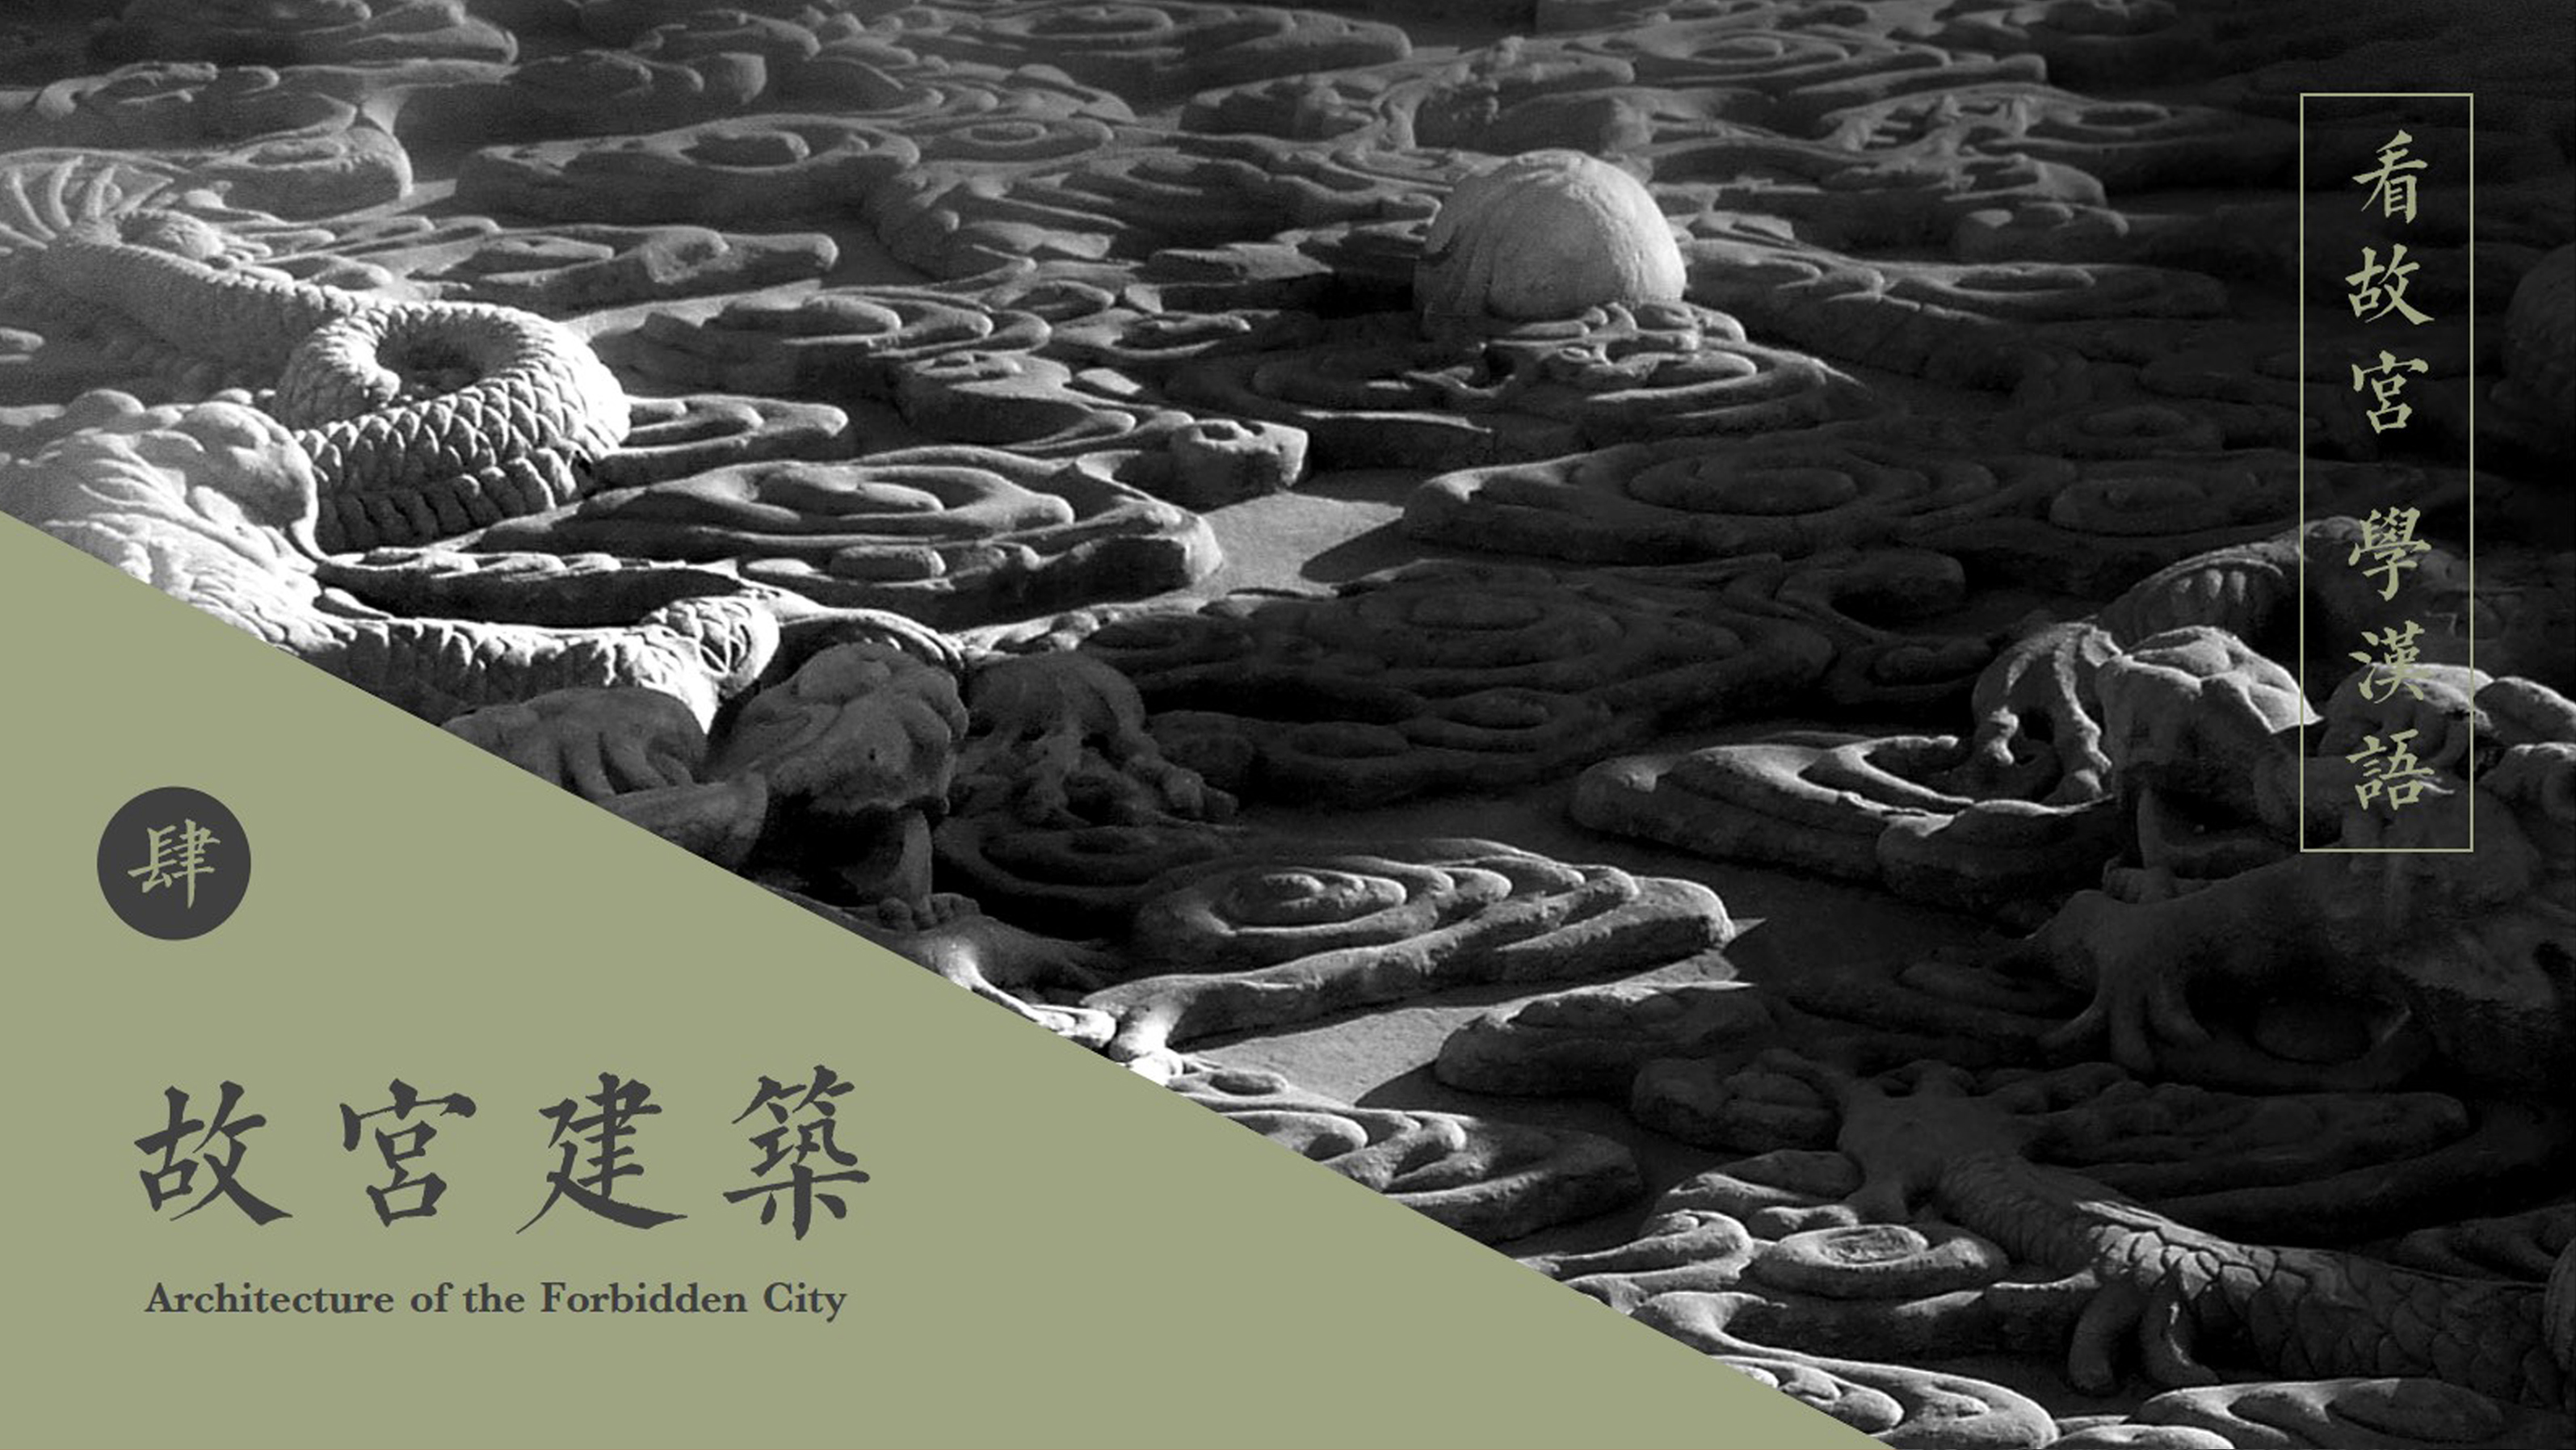 Lecture 4 “The Architecture of the Forbidden City”